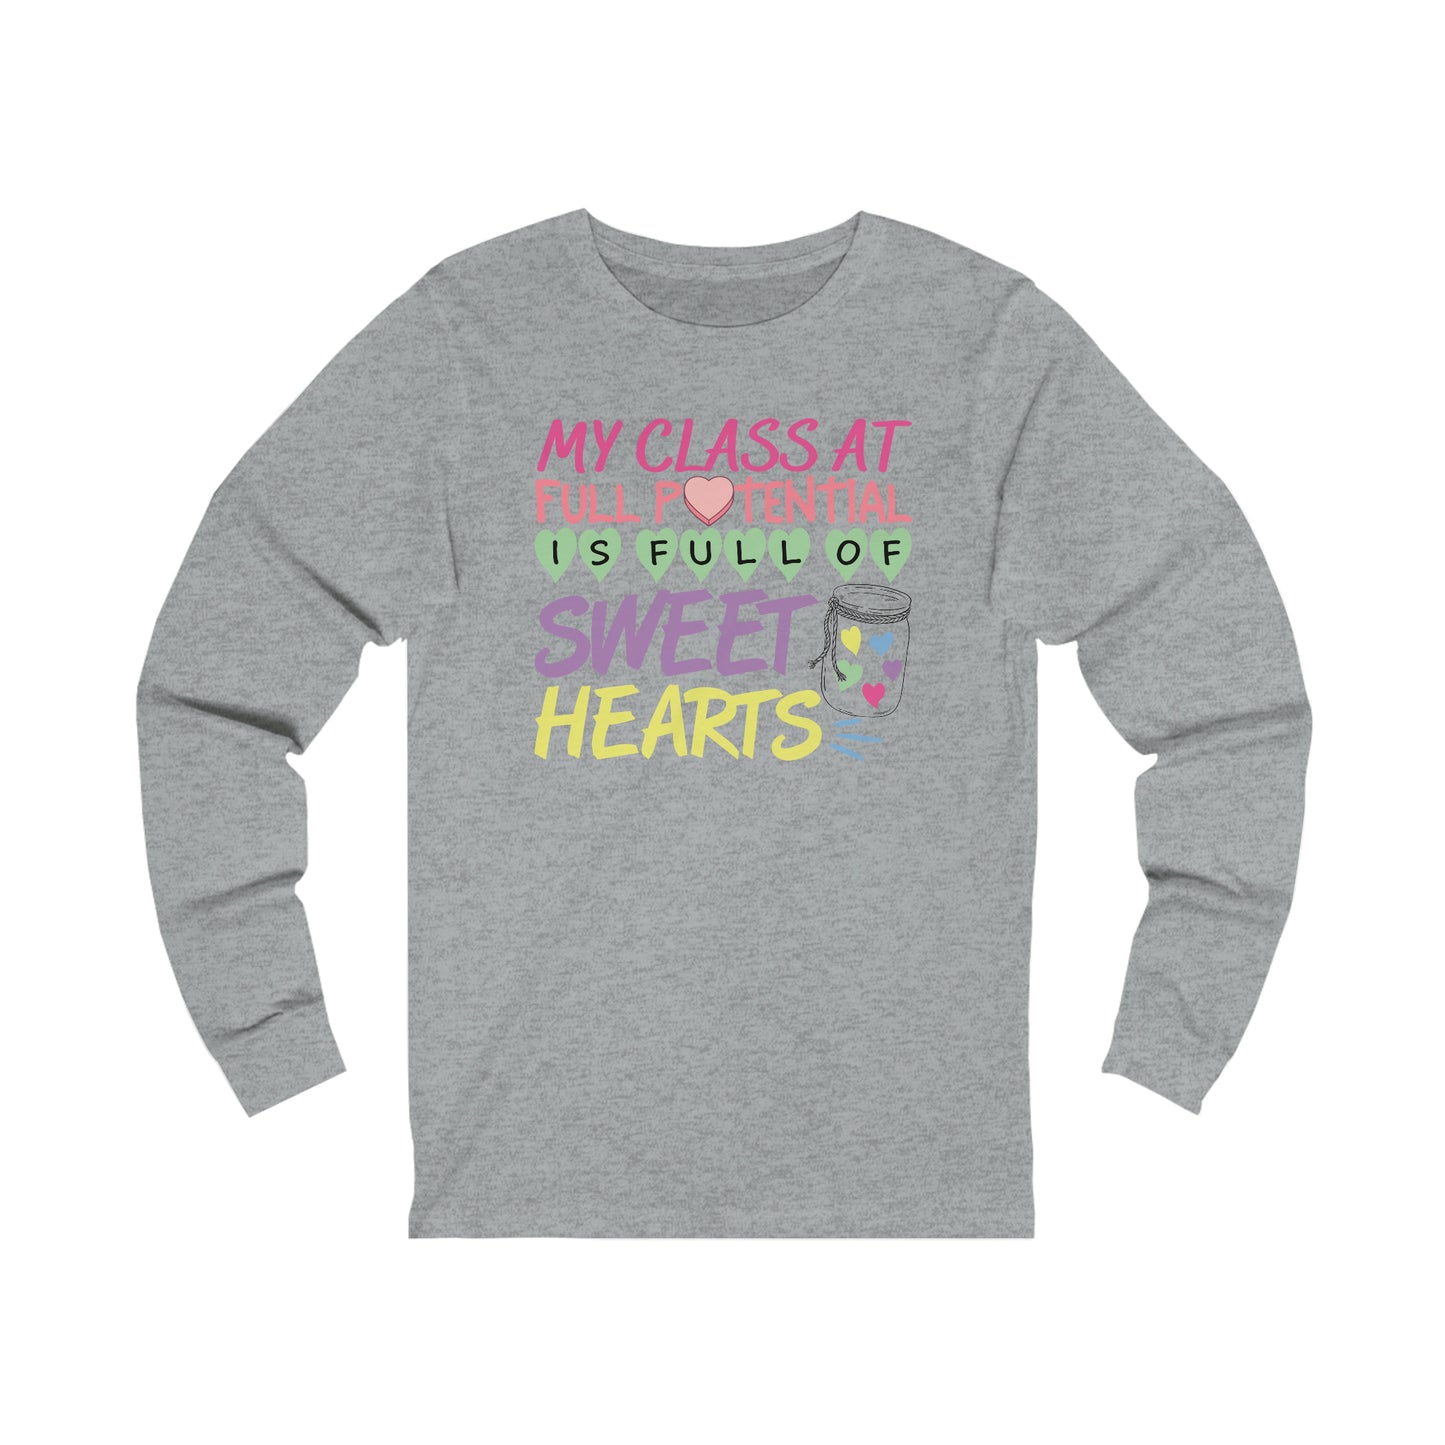 My Class At Full Potential Is Full Of Sweet Hearts Long Sleeve Shirt - Bella - 3XL